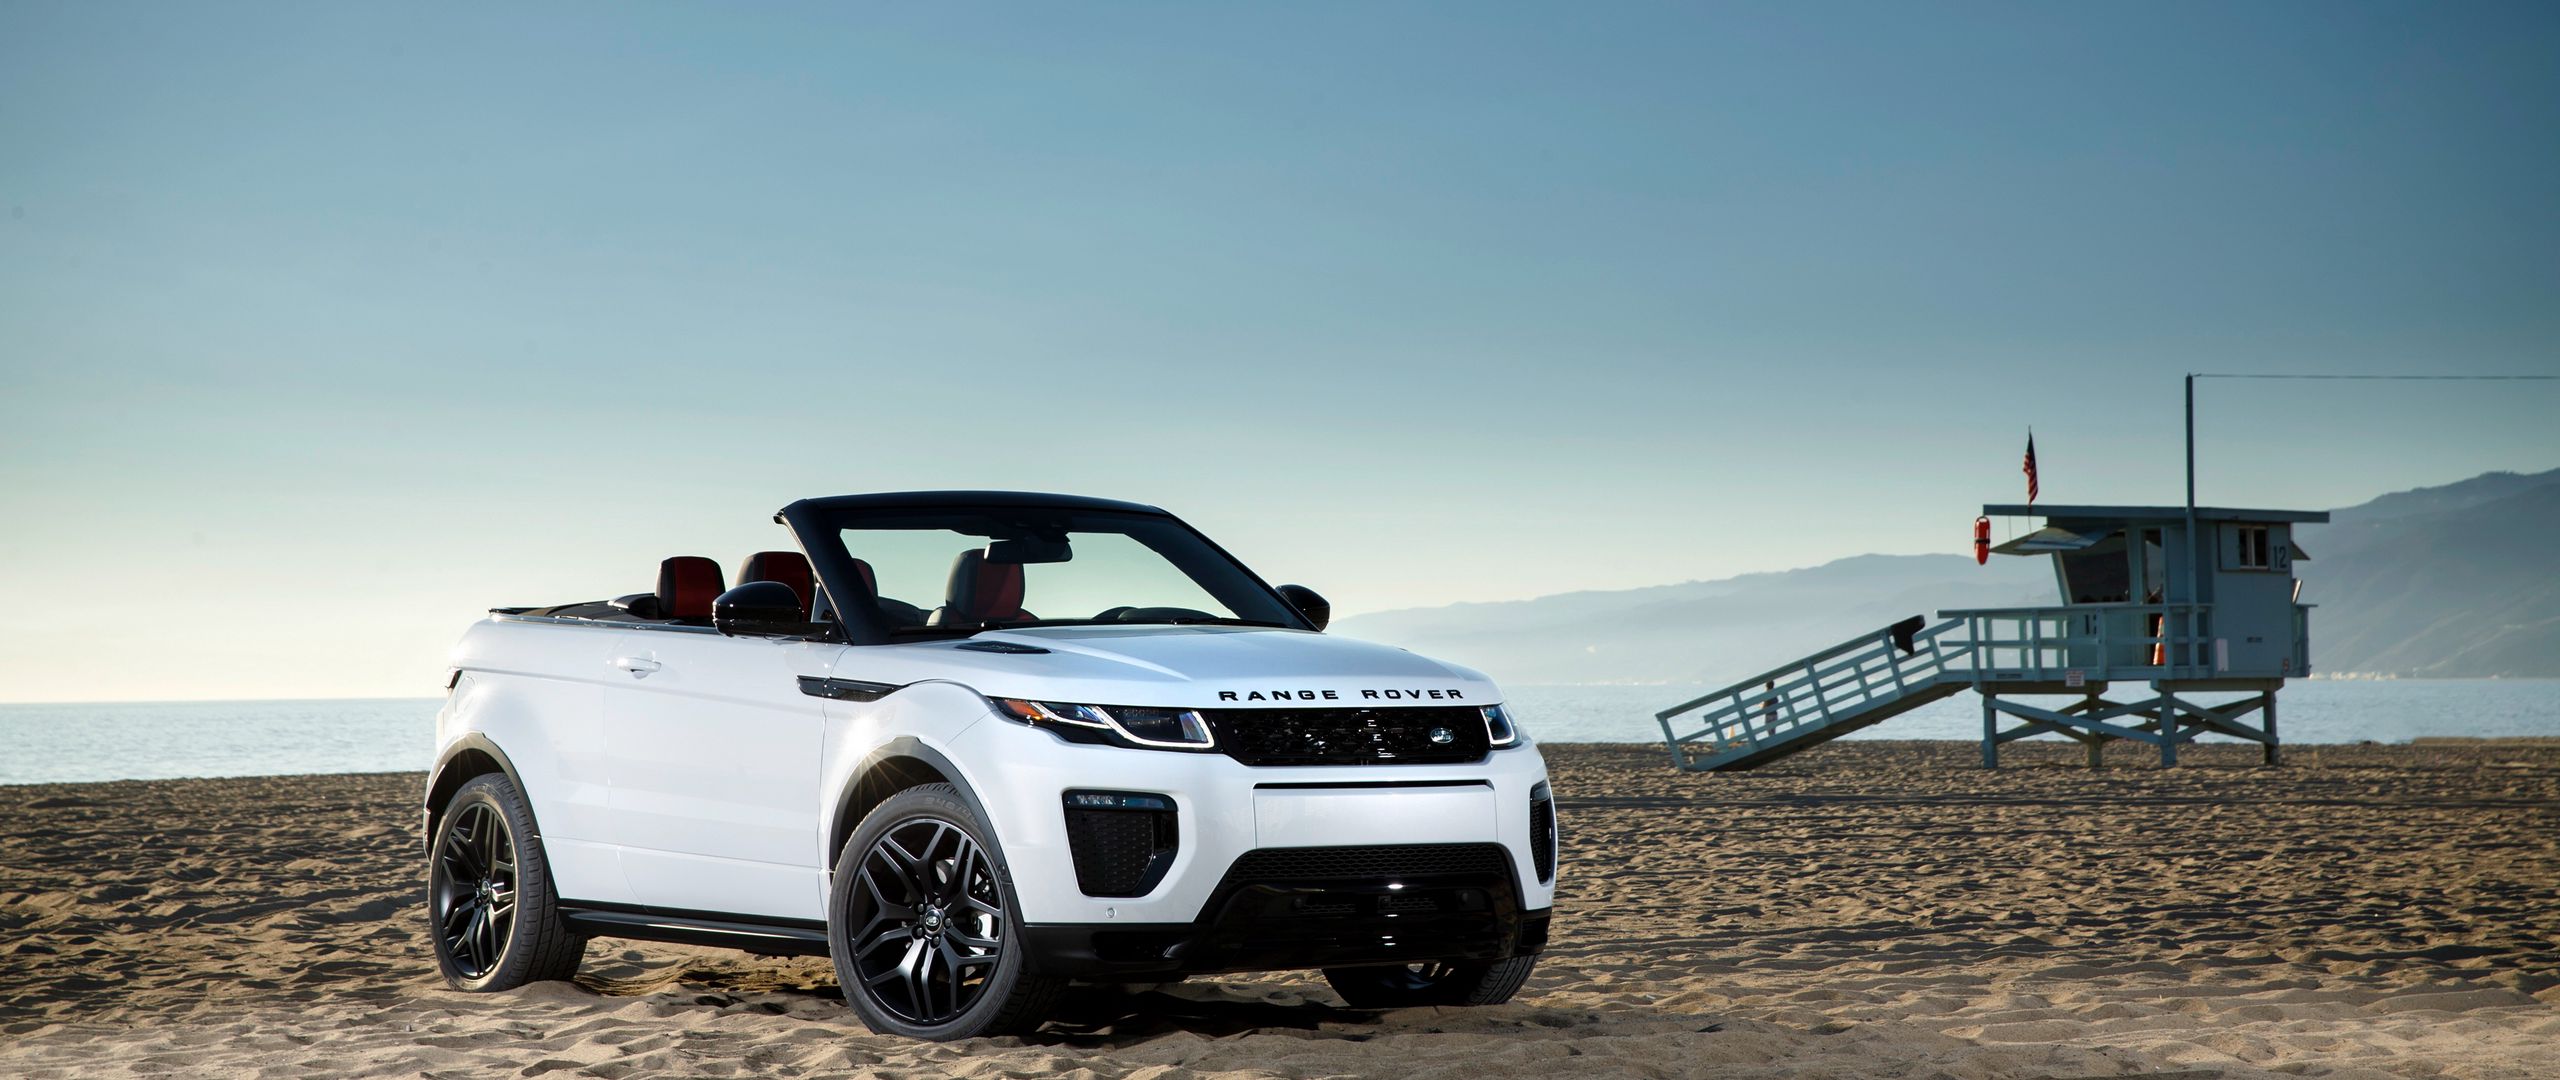 Download wallpaper 2560x1080 land rover, range rover, evoque, side view  dual wide 1080p hd background